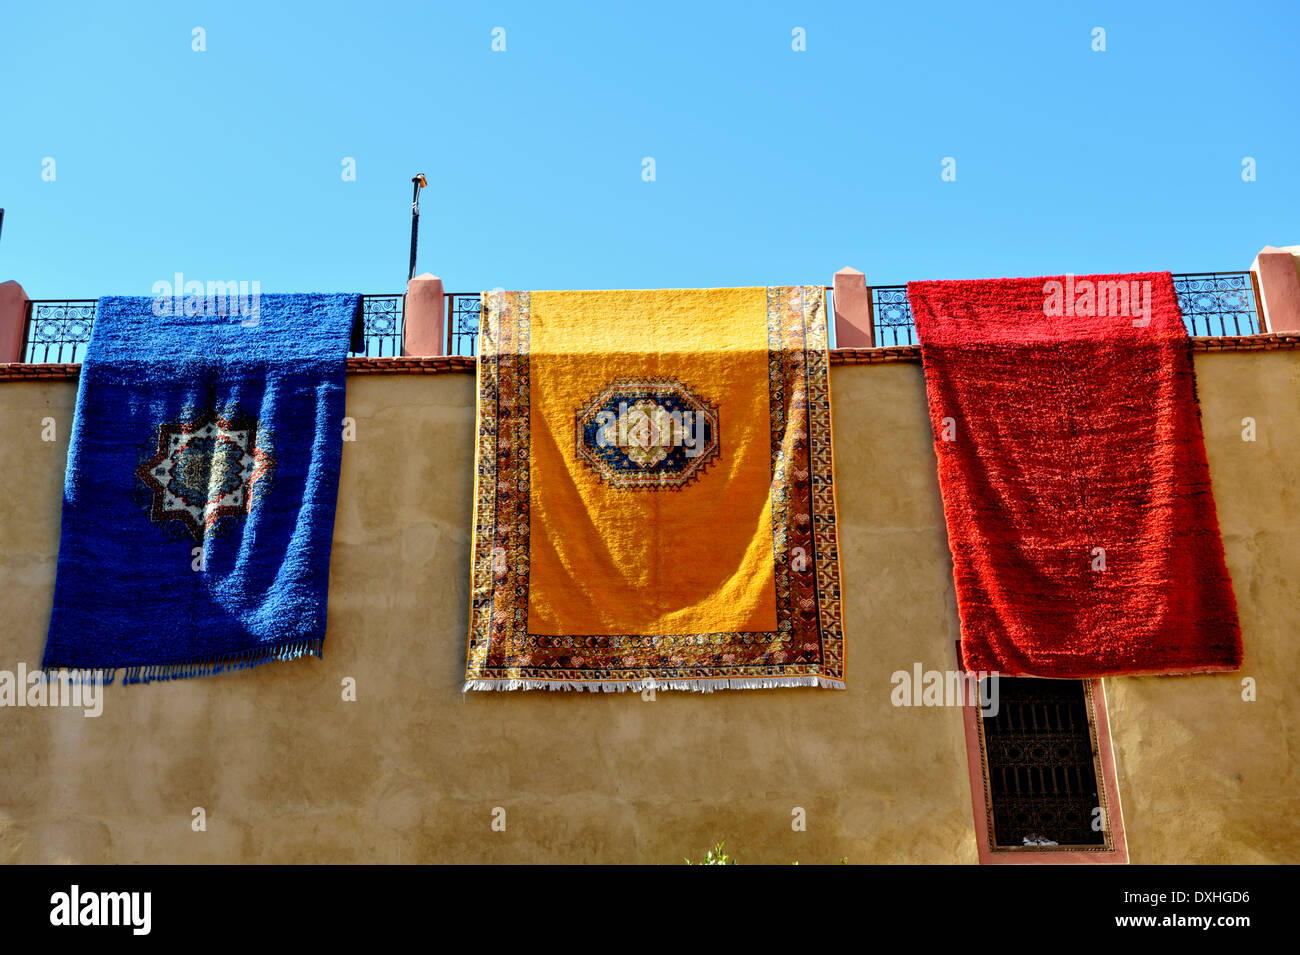 Red, yellow and blue rugs hanging on wall, Marrakech, Morocco Stock Photo